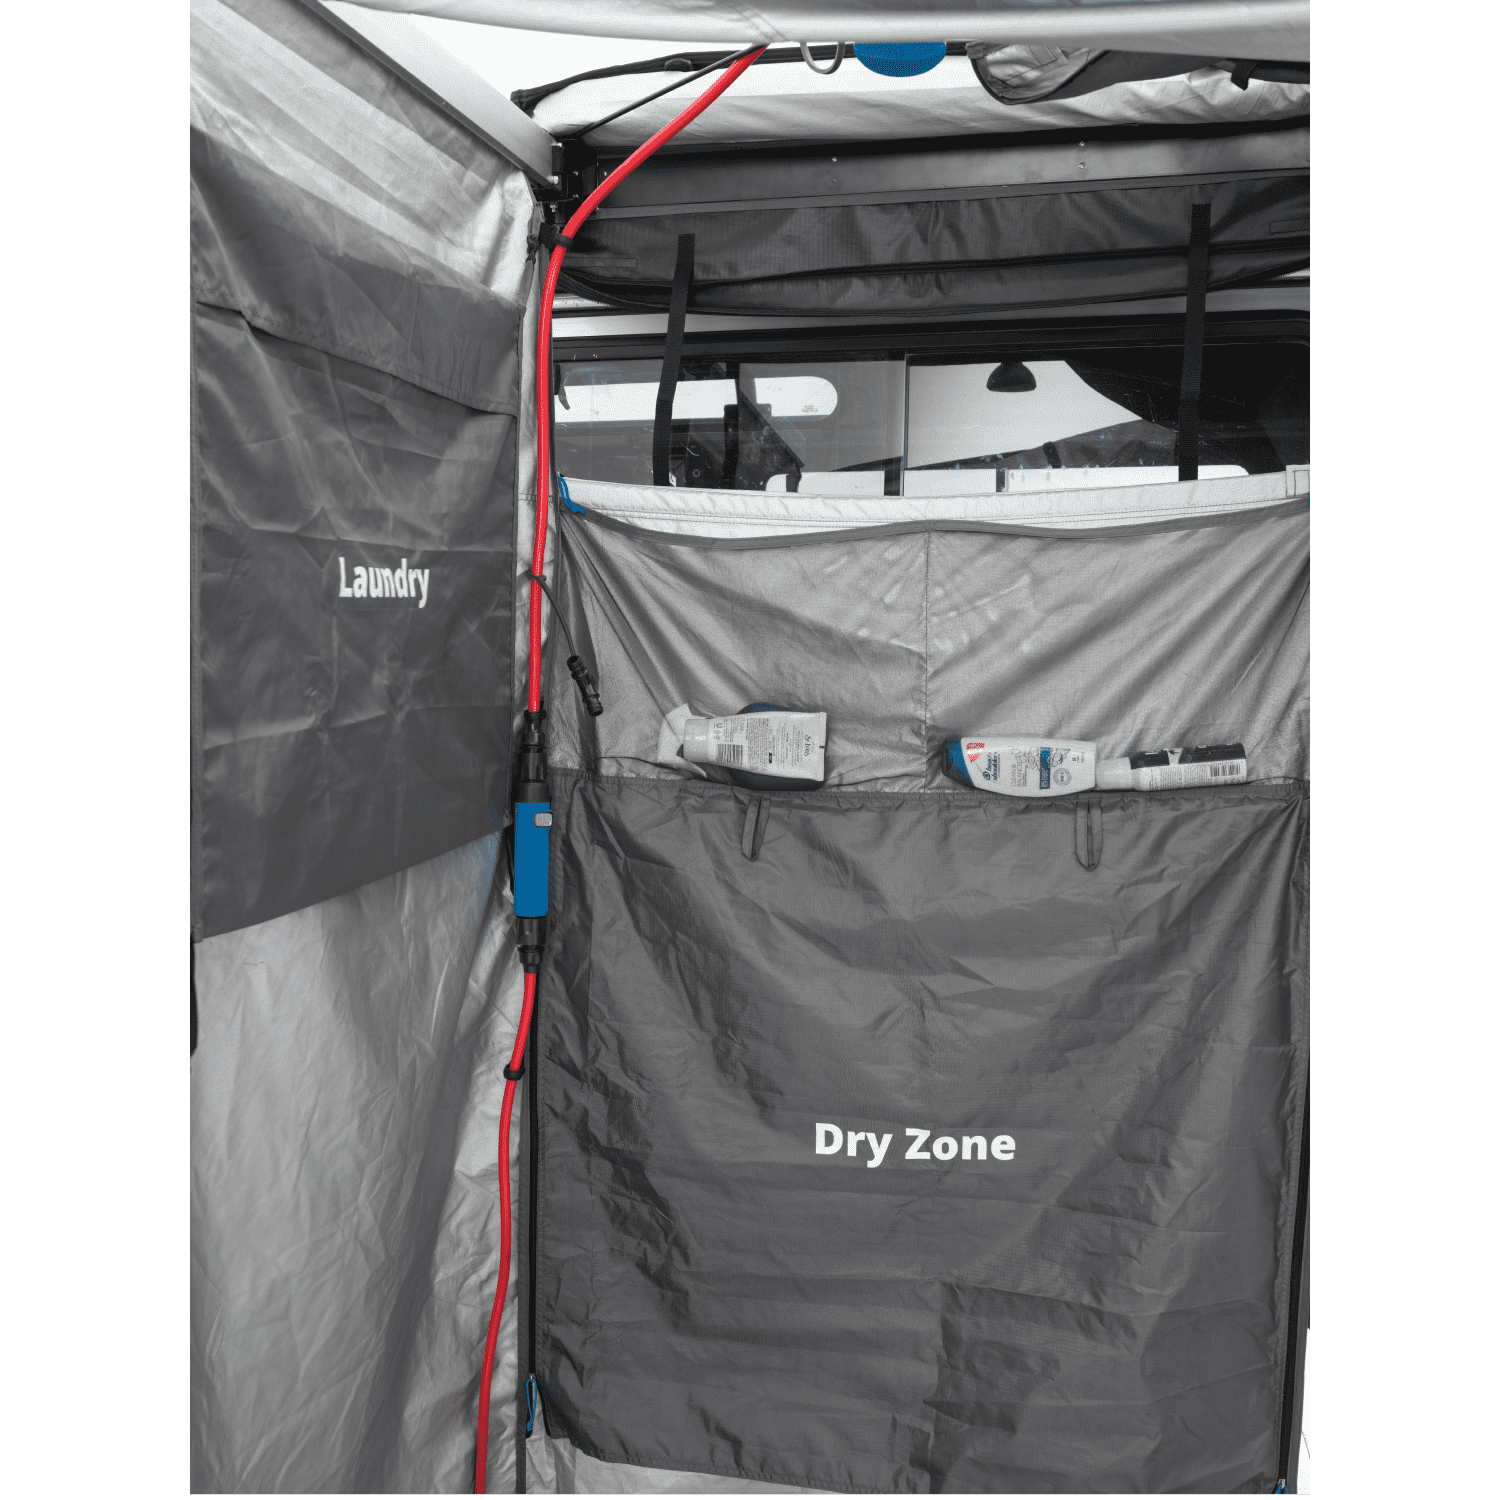 Internal view of a mounted shower tent, displaying the text 